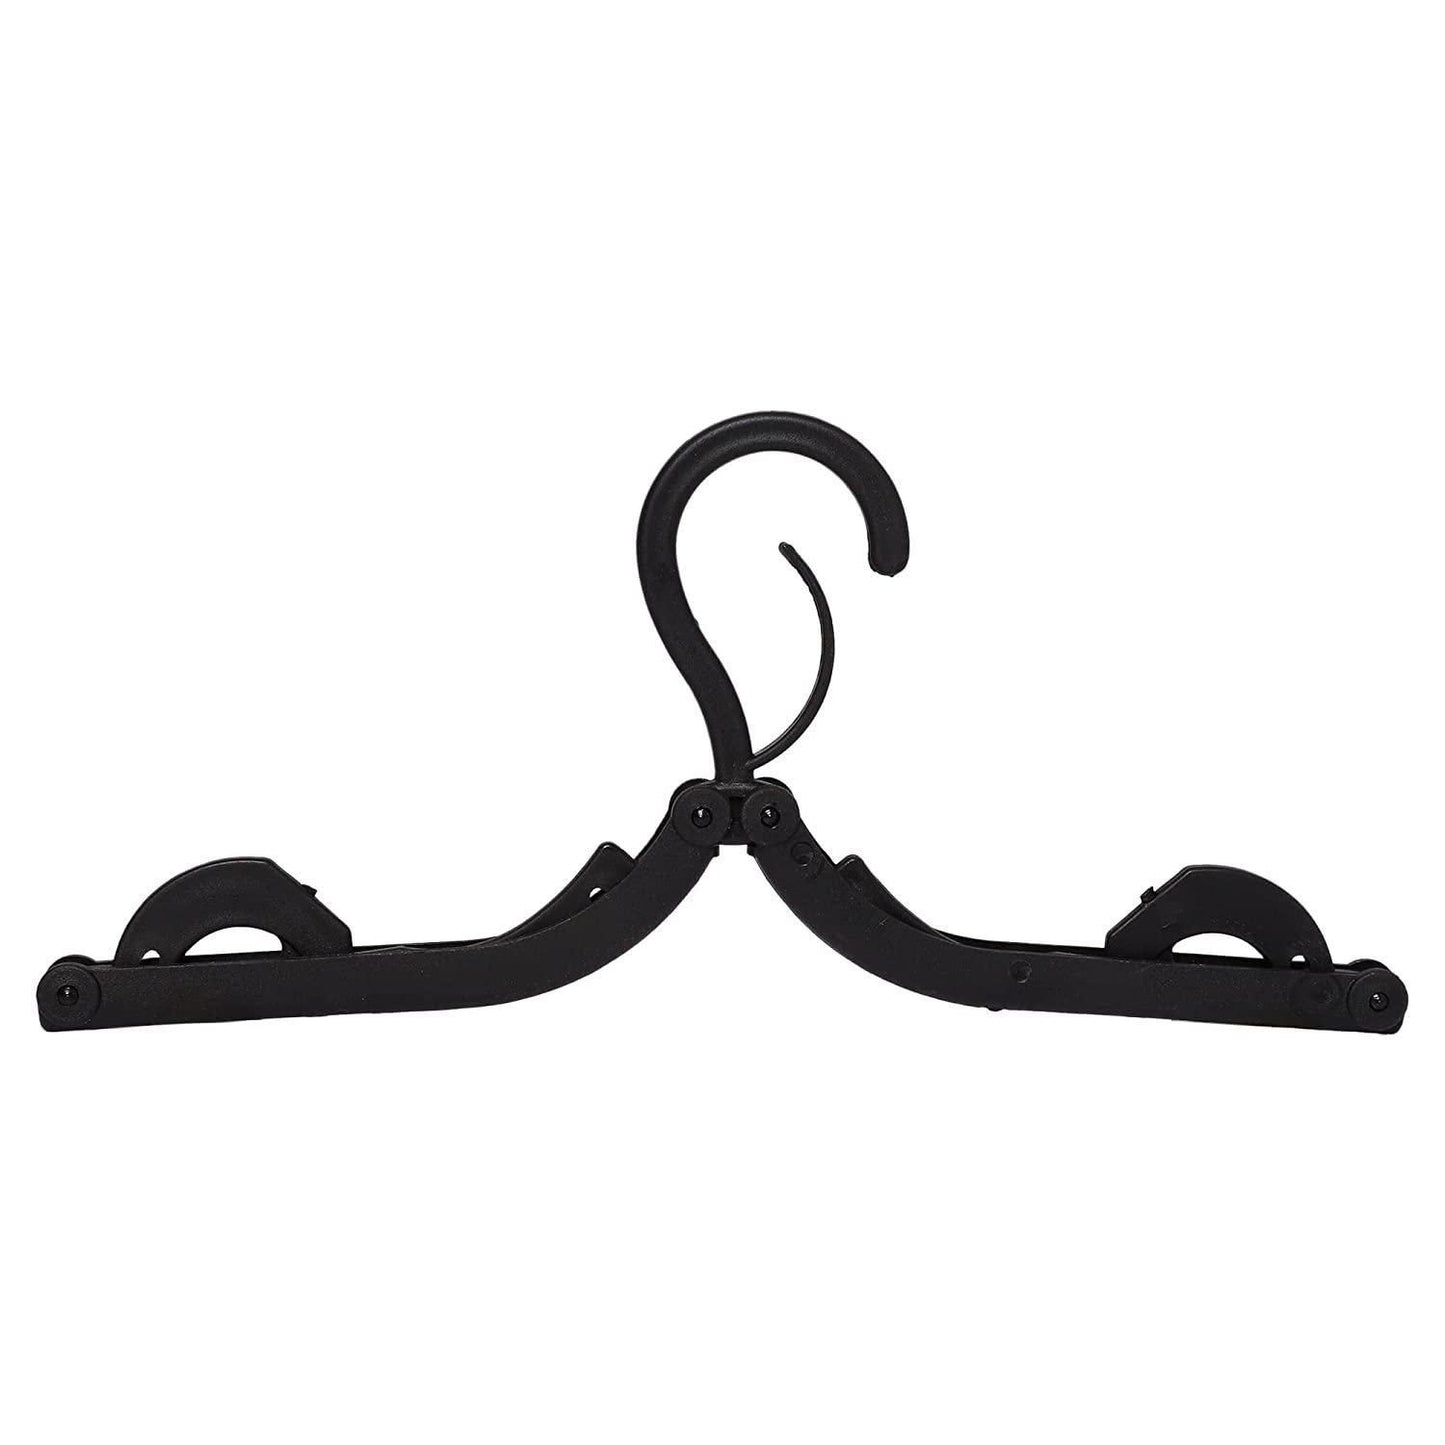 Foldable Portable Clothes Hangers (Pack of 6, Black)